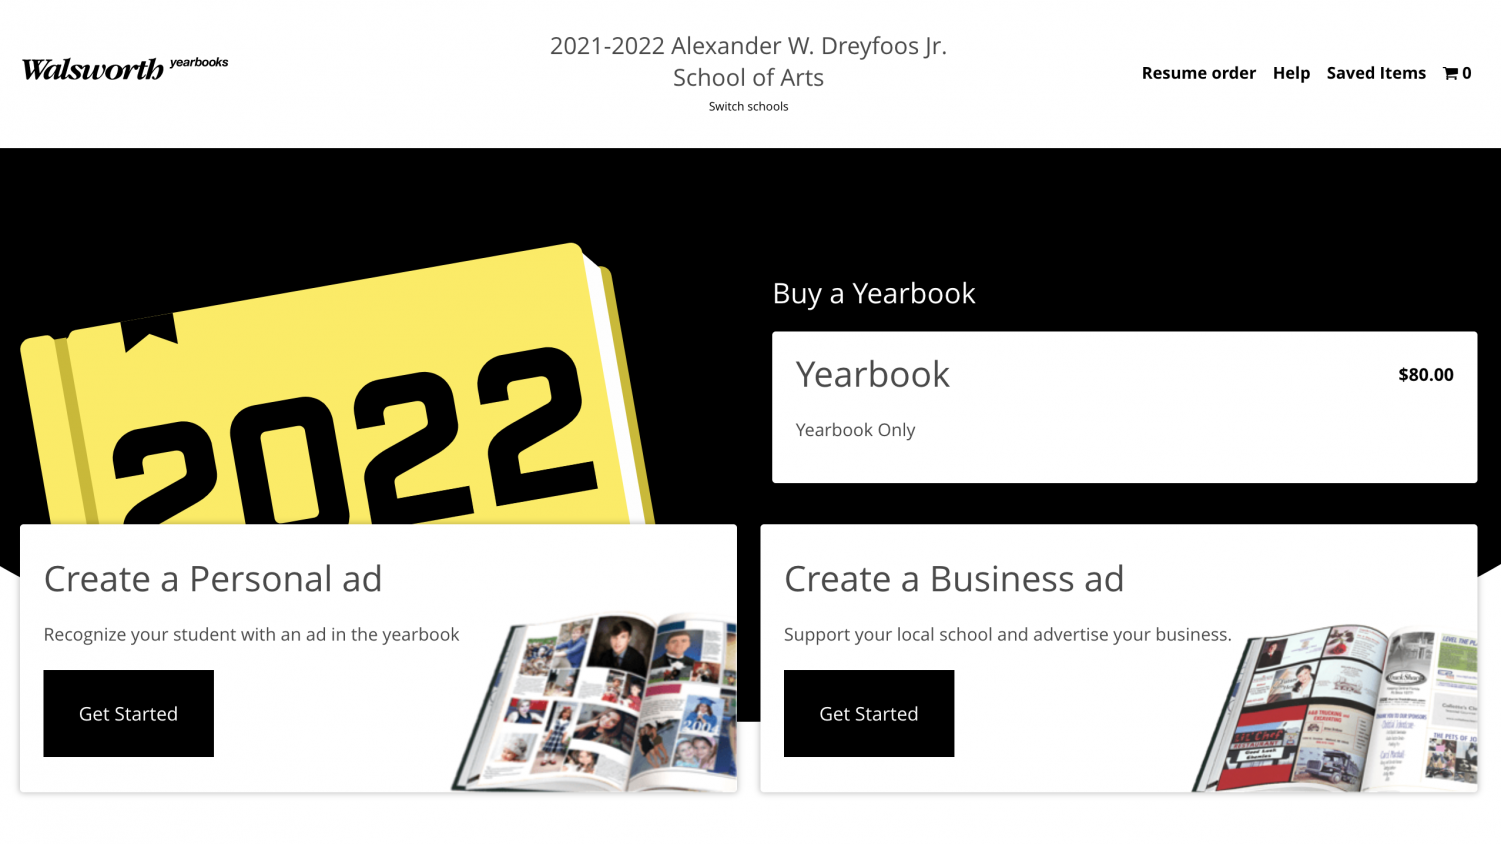 Walsworth Yearbook Coupon Codes, 10-2021 - wide 9